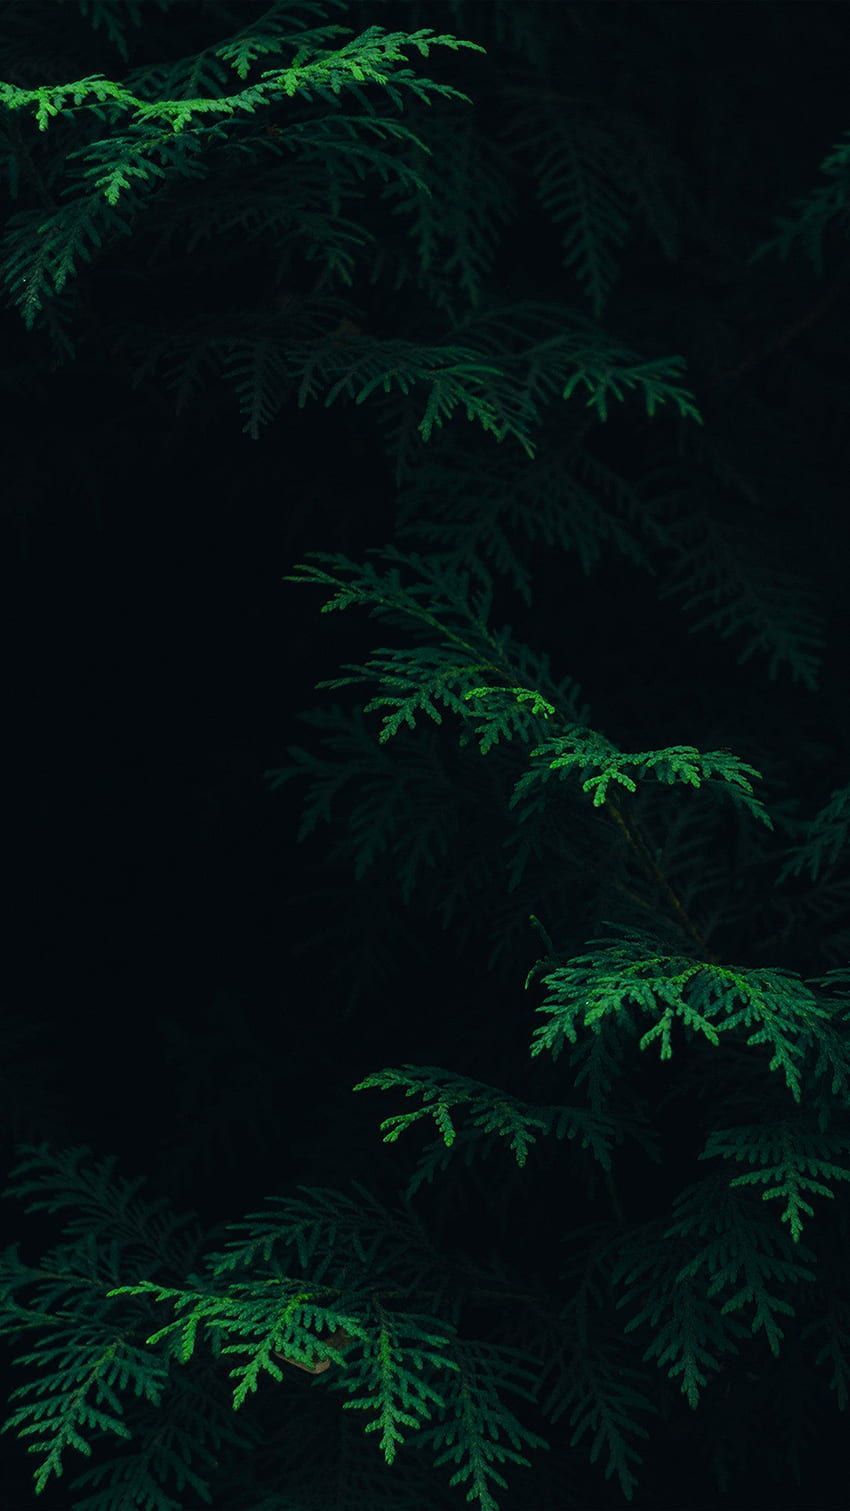 A green tree branch against a black background - Jungle, dark green